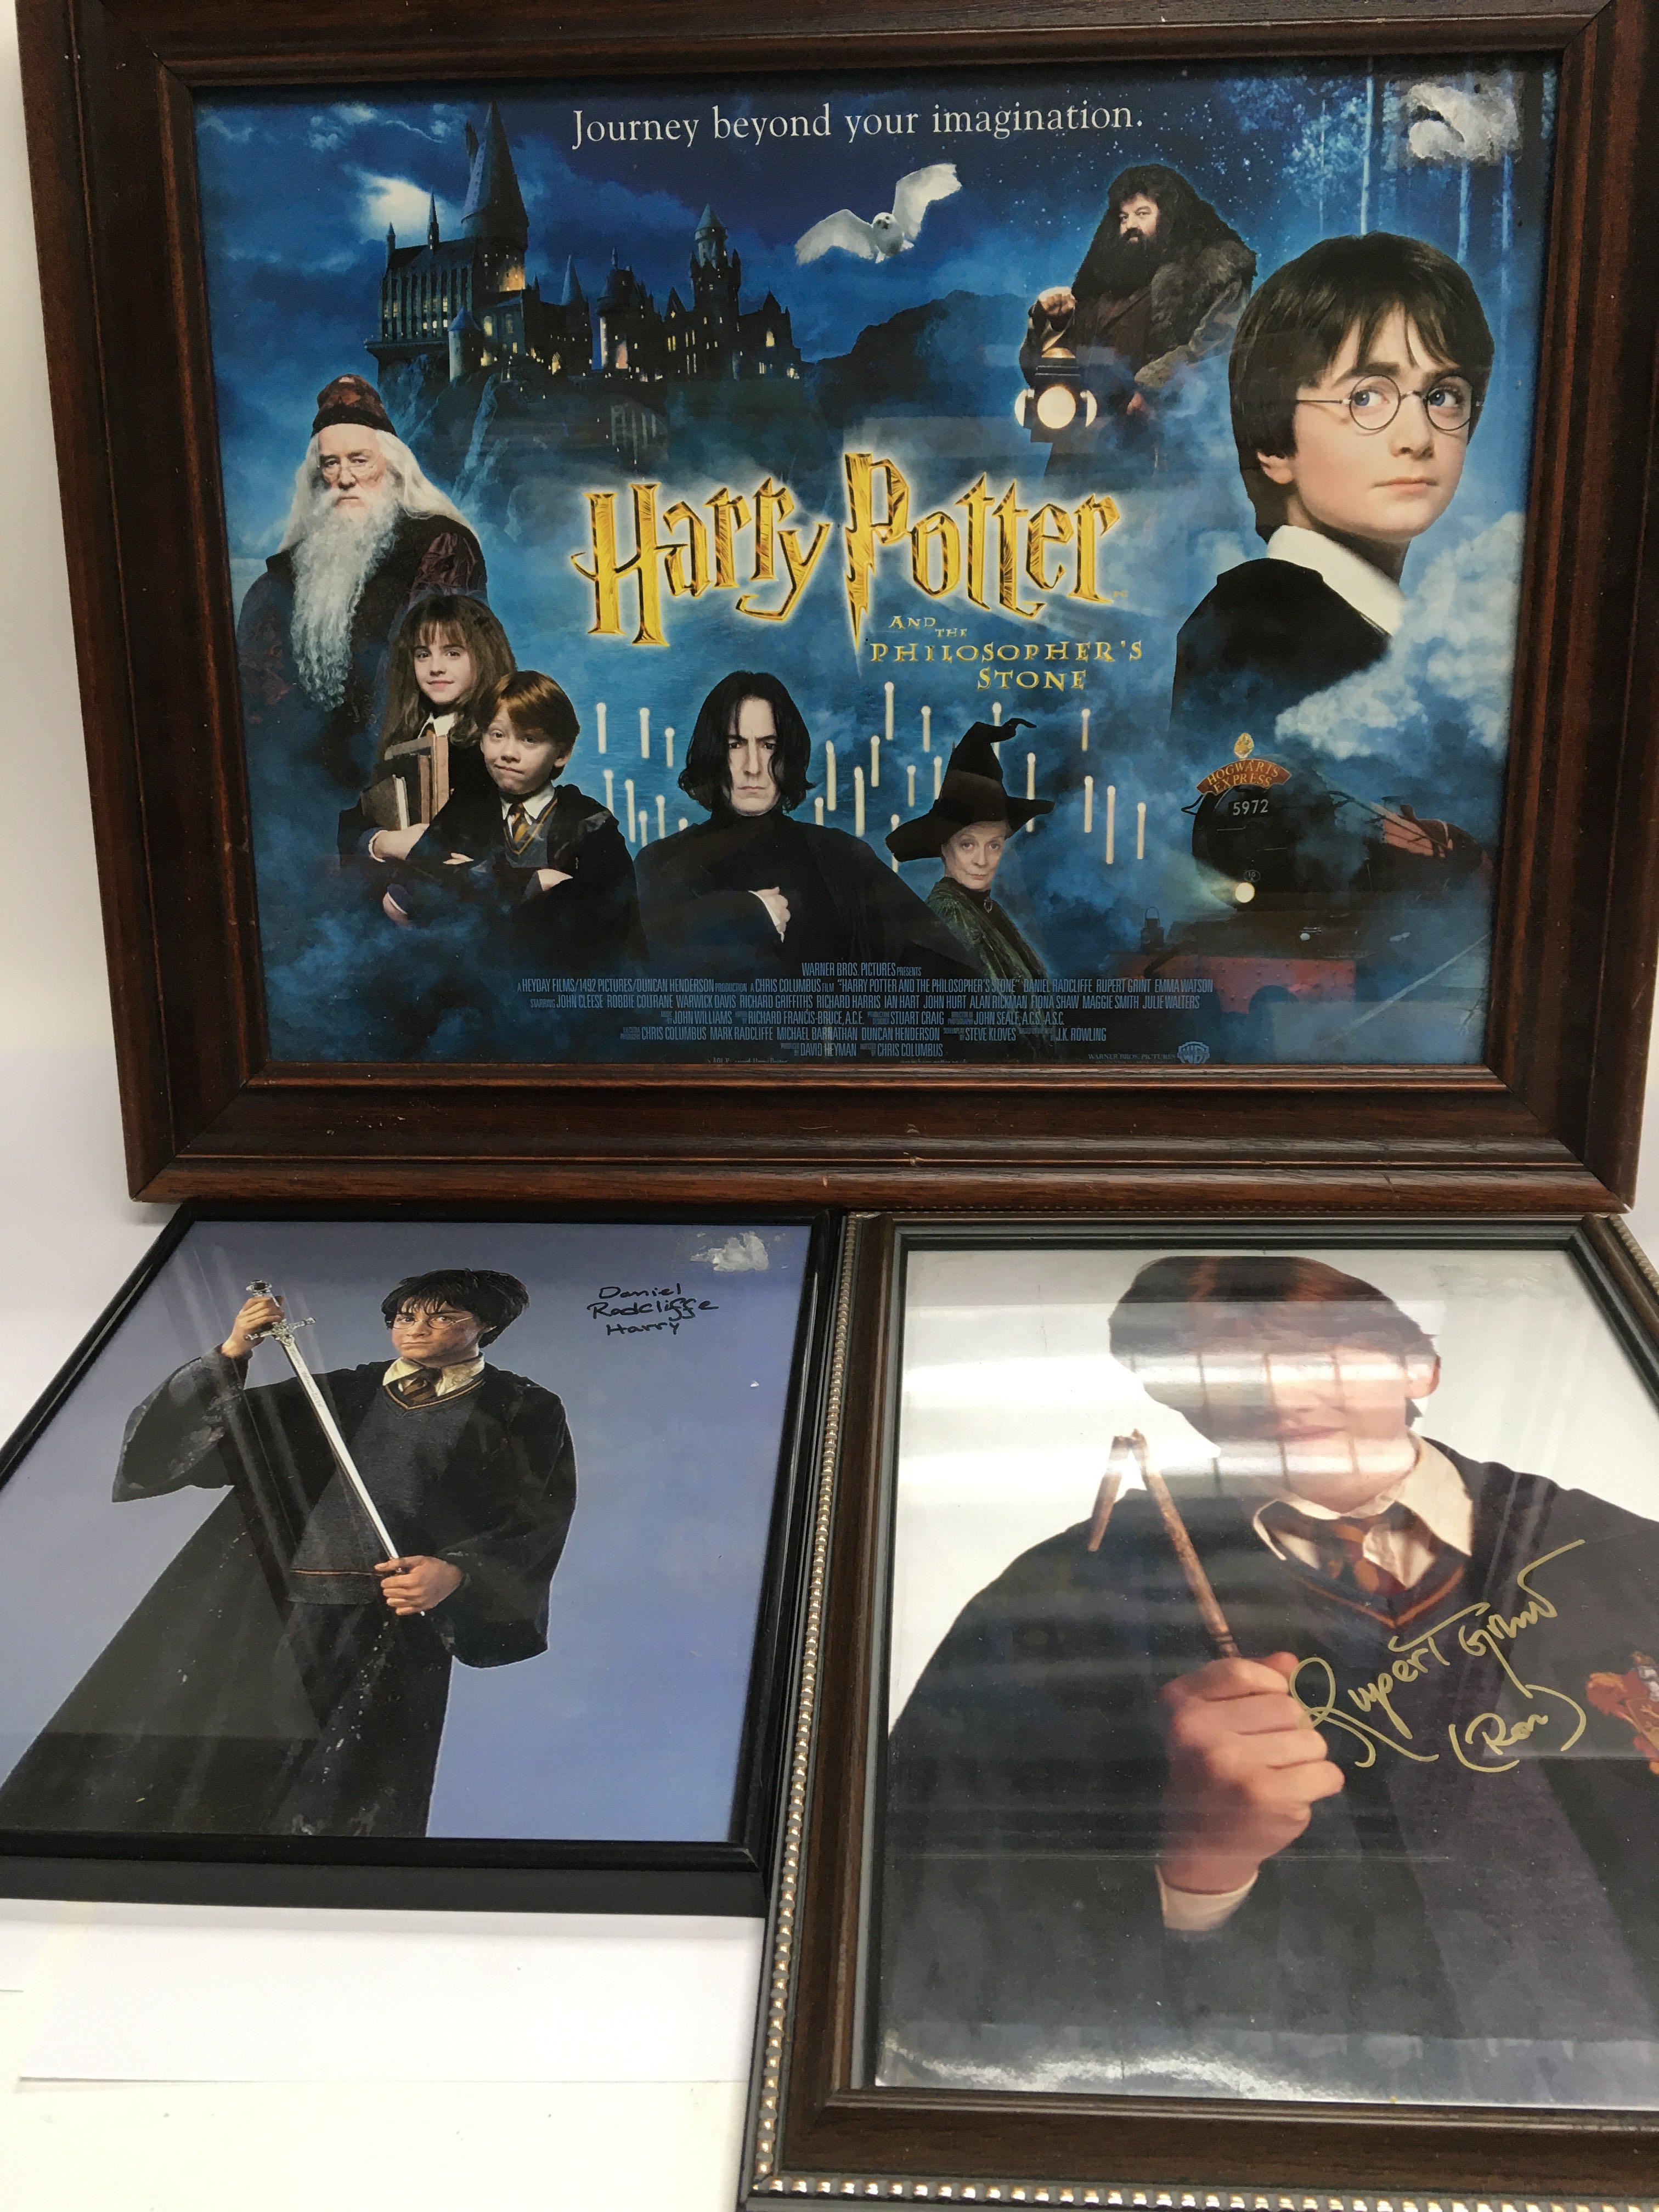 Two framed Harry Potter signed photos of Daniel Ra